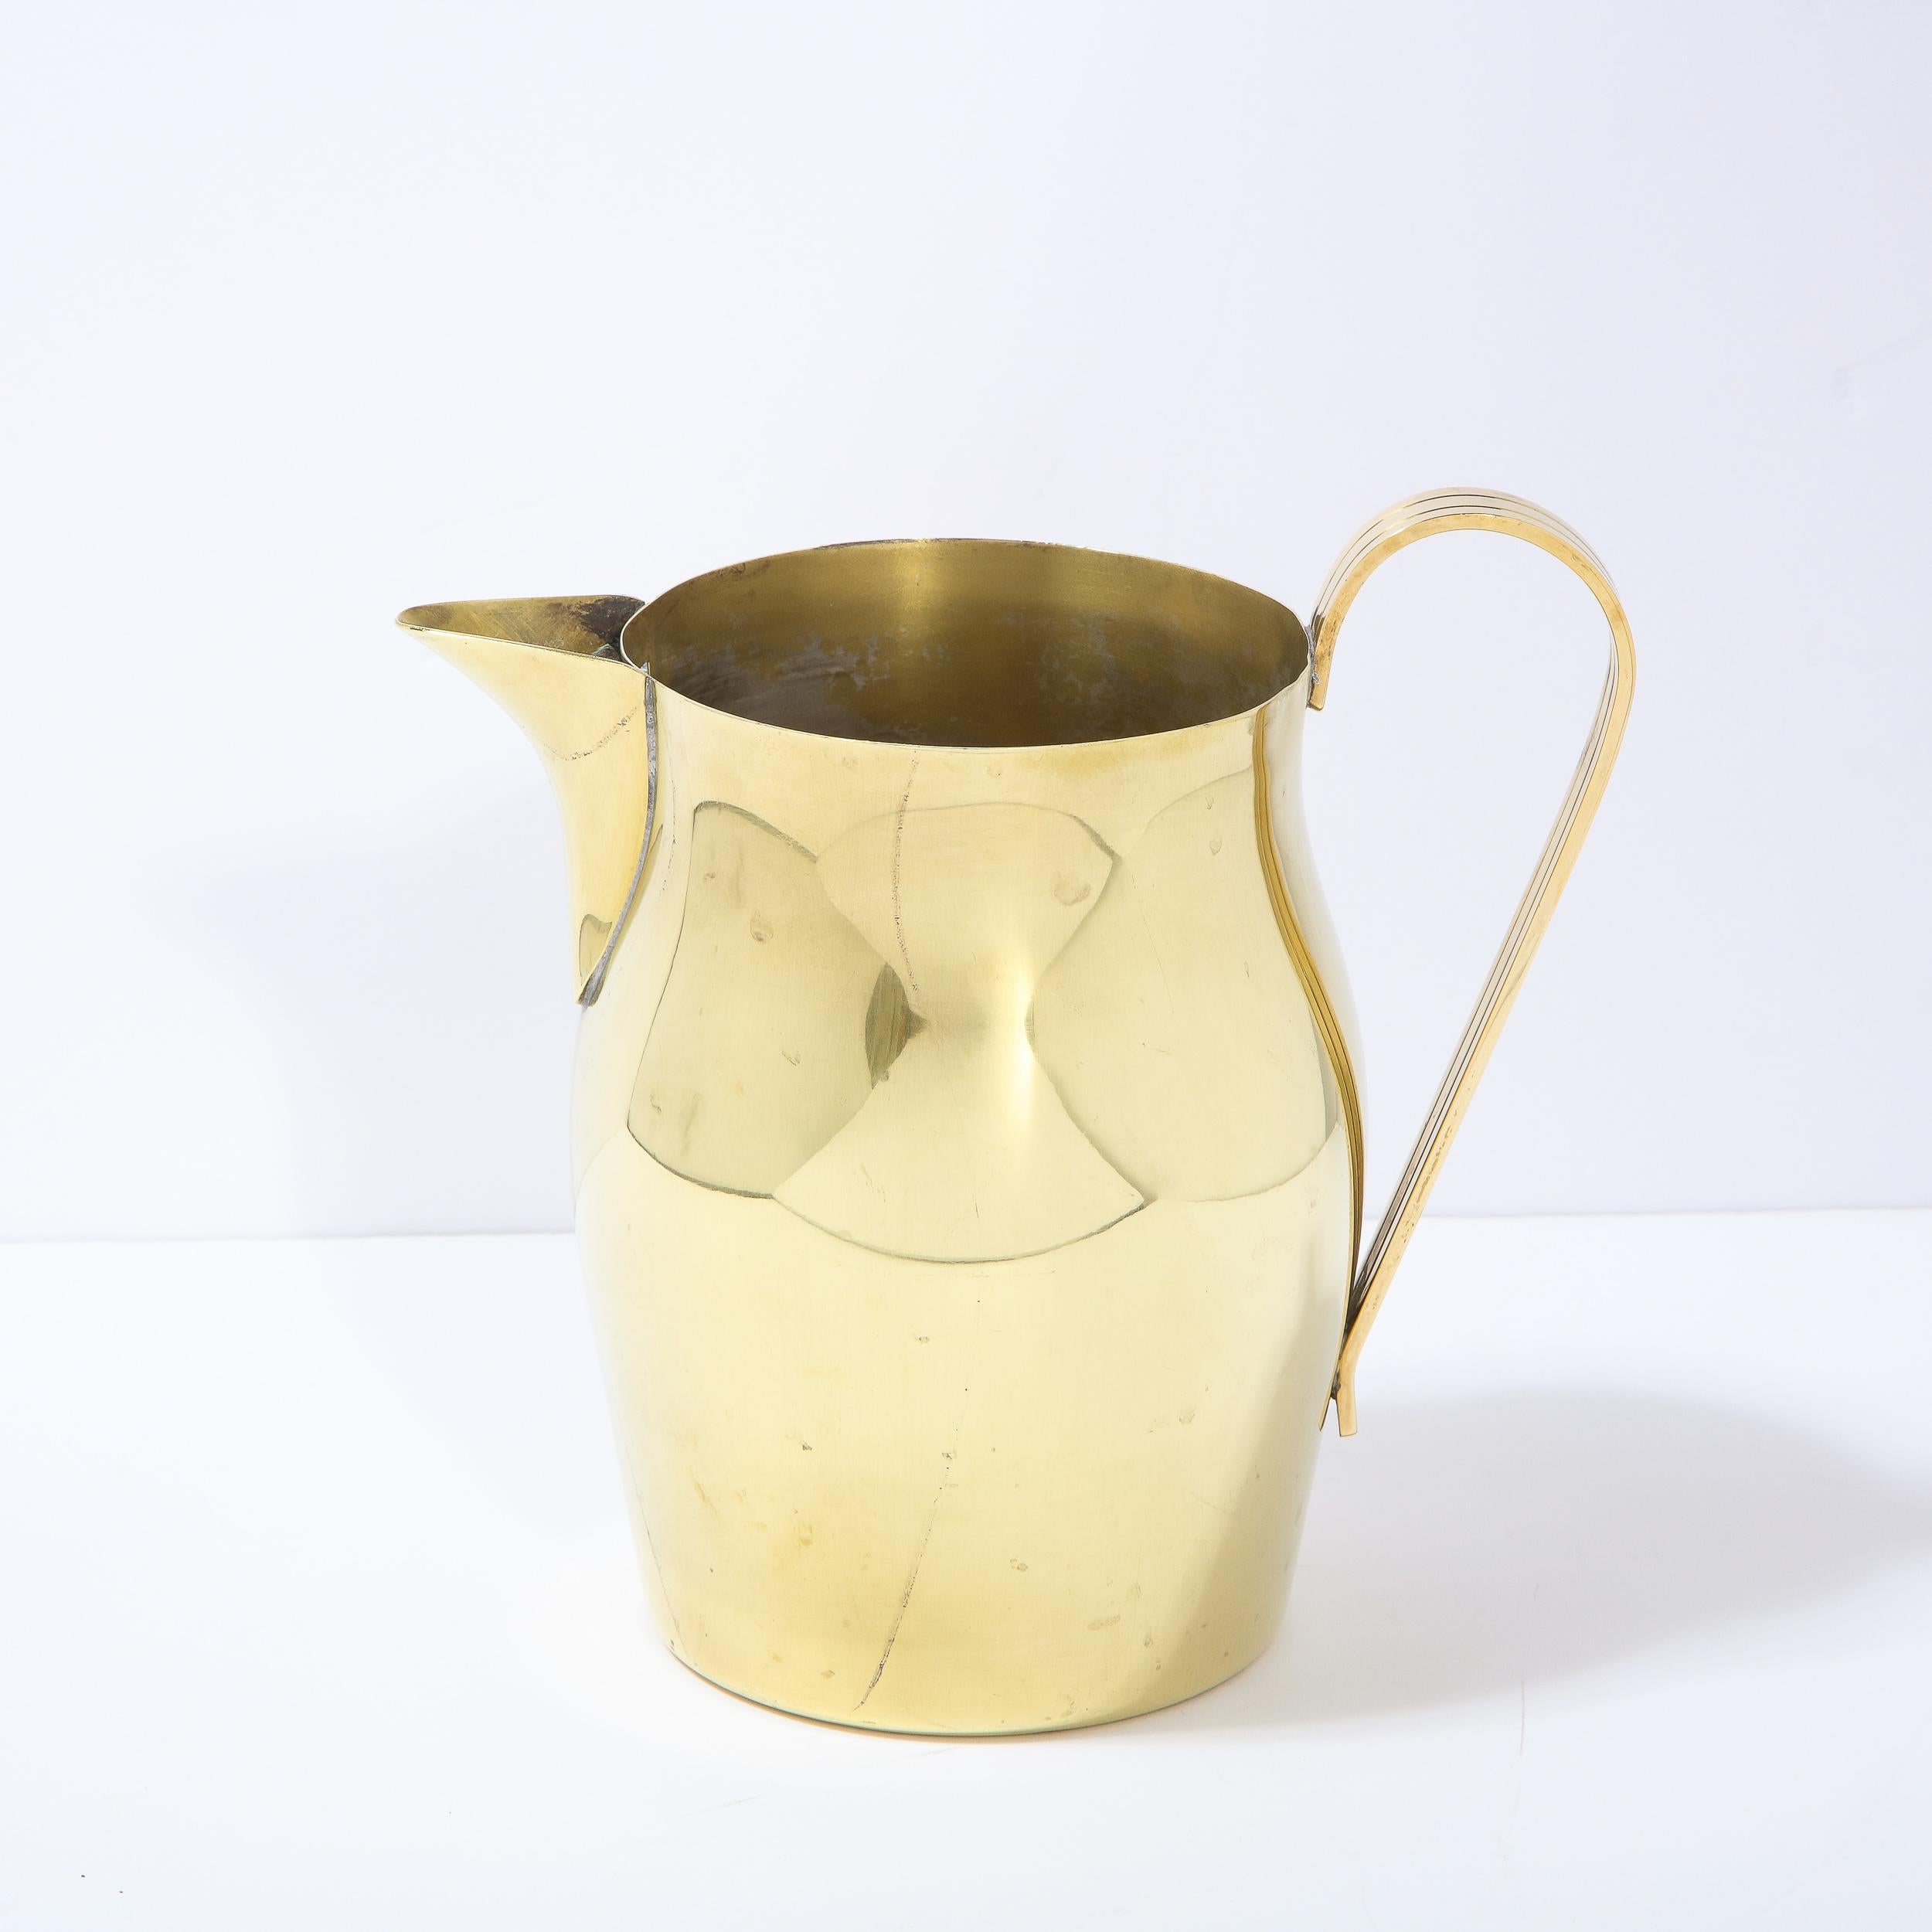 This elegant Mid-Century Modern polished brass pitcher was designed by Tommi Parzinger for Dorlyn Silversmiths in the United States circa 1960. It features an undulating body with a triangular concave beak-like spout and a curved and striated handle